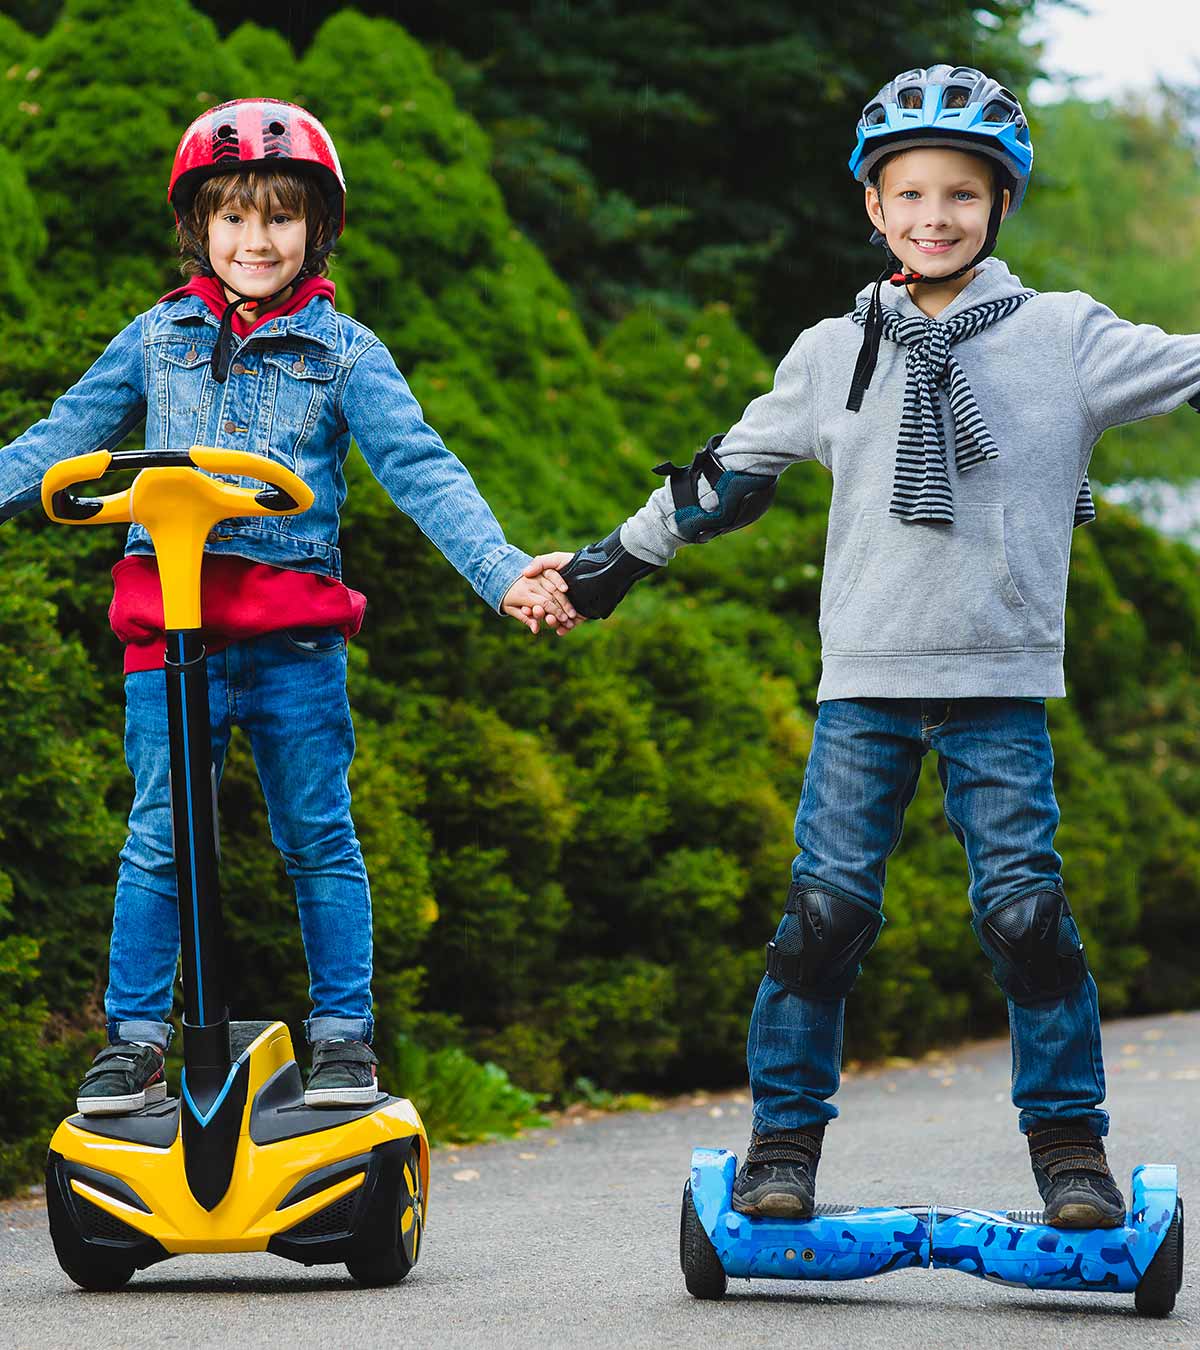 15 Best Hoverboards For Kids To Ride In 2022 And Buyer's Guide